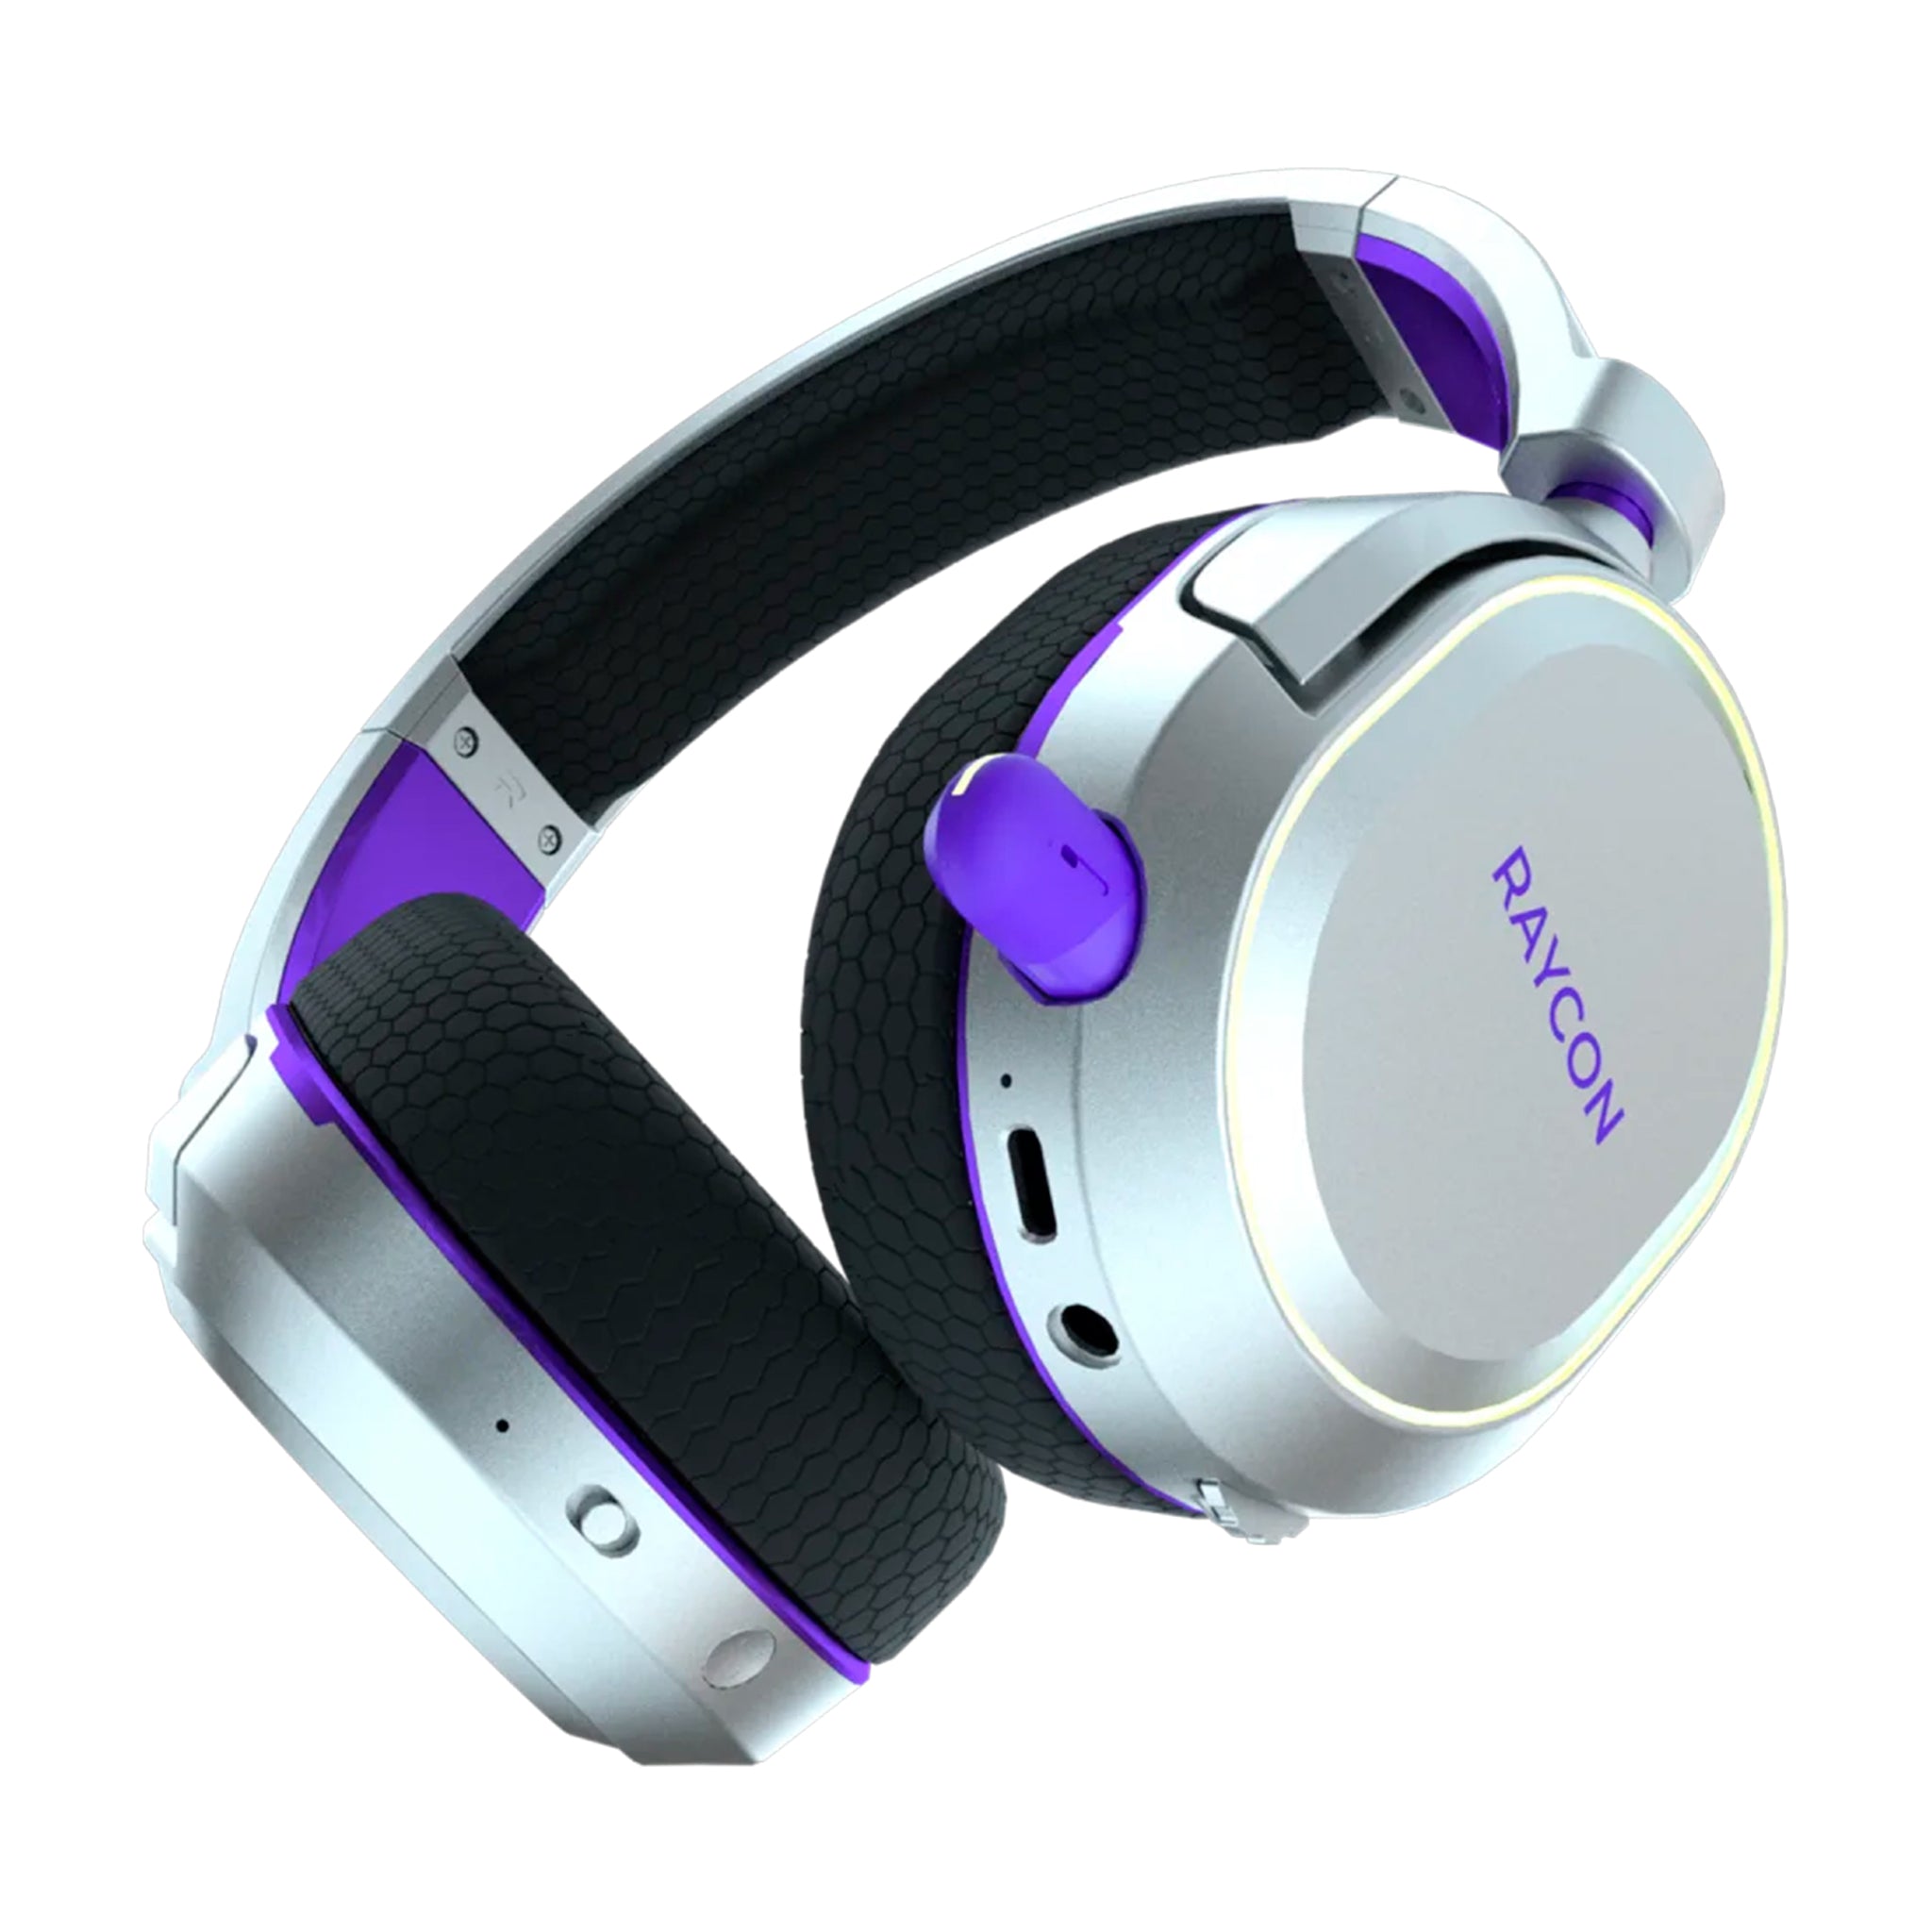 Raycon - The Gaming Over Ear Wireless Headphones - Silver